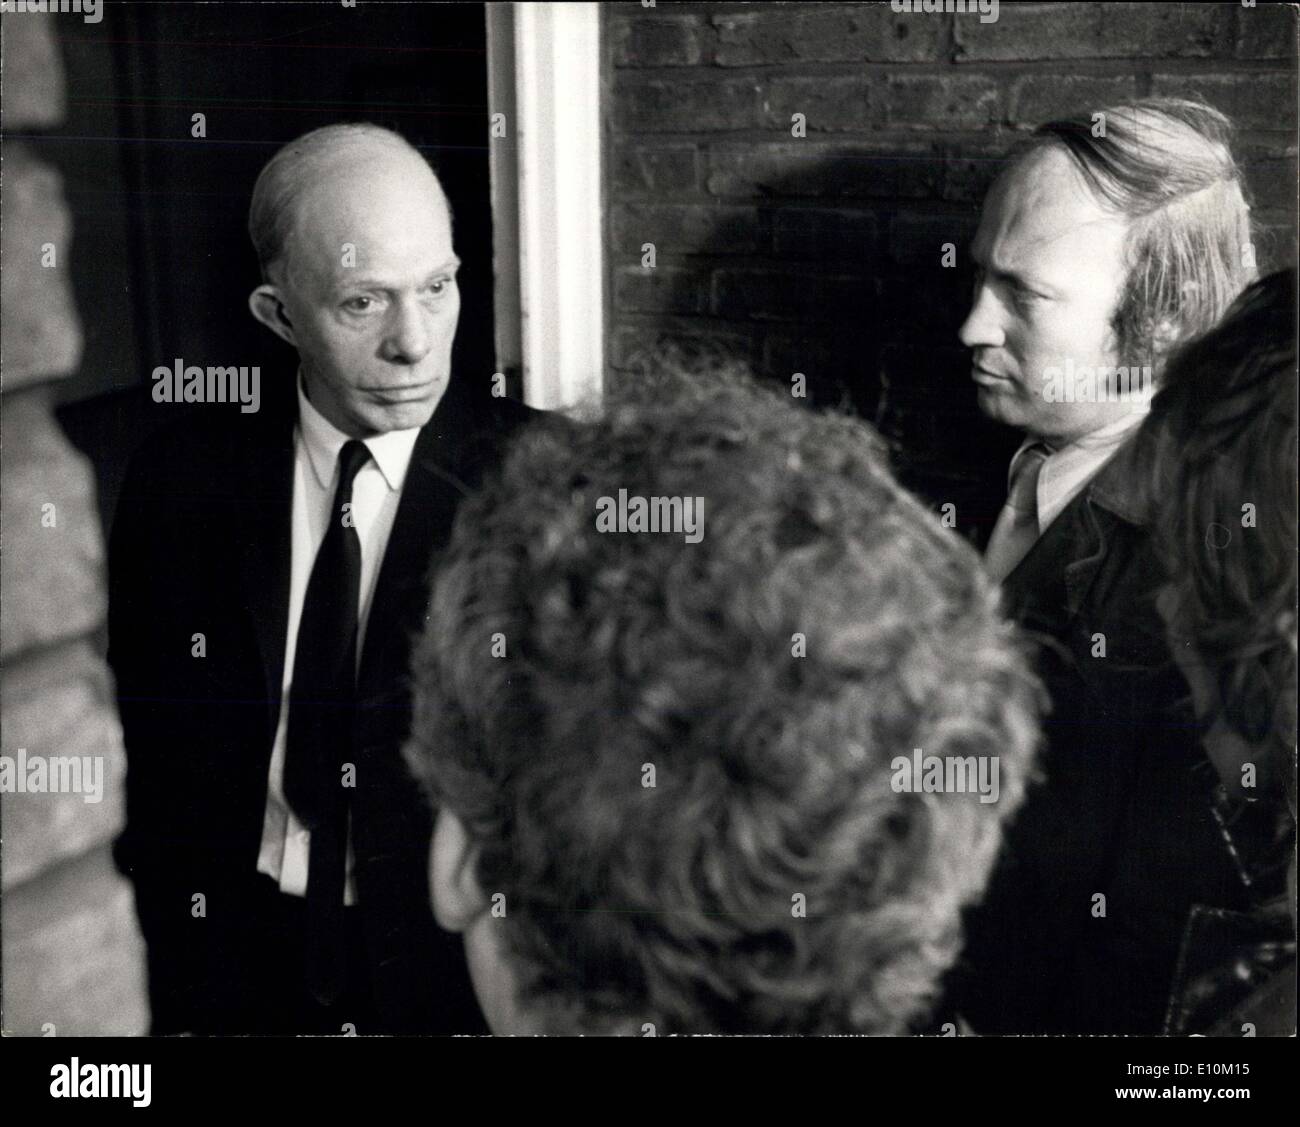 May 23, 1973 - LORD LAMBTON MAKES A STATEMENT AND ADMITS HE HAD A CASUAL AQUAINTANCE WITH A ''CALL GIRL'' LORD LAMBTON, the Parliamentary Under-Secretary of States for Defence for the Royal Air Force, yesterday resigned his position in the Government. Today in a statement he said ''I had a casual aquaintance with a''call girl'' but there has been no security risk and no blackmail''. I have no excuses whatsoever to make. I behaved with incredulous stupidity''. PHOTO SHOWS: Mr. Stewart who is Lord Lambton's butler, speaks to reporters outside the Lambton home in Hamilton Terrace, London,N.W Stock Photo